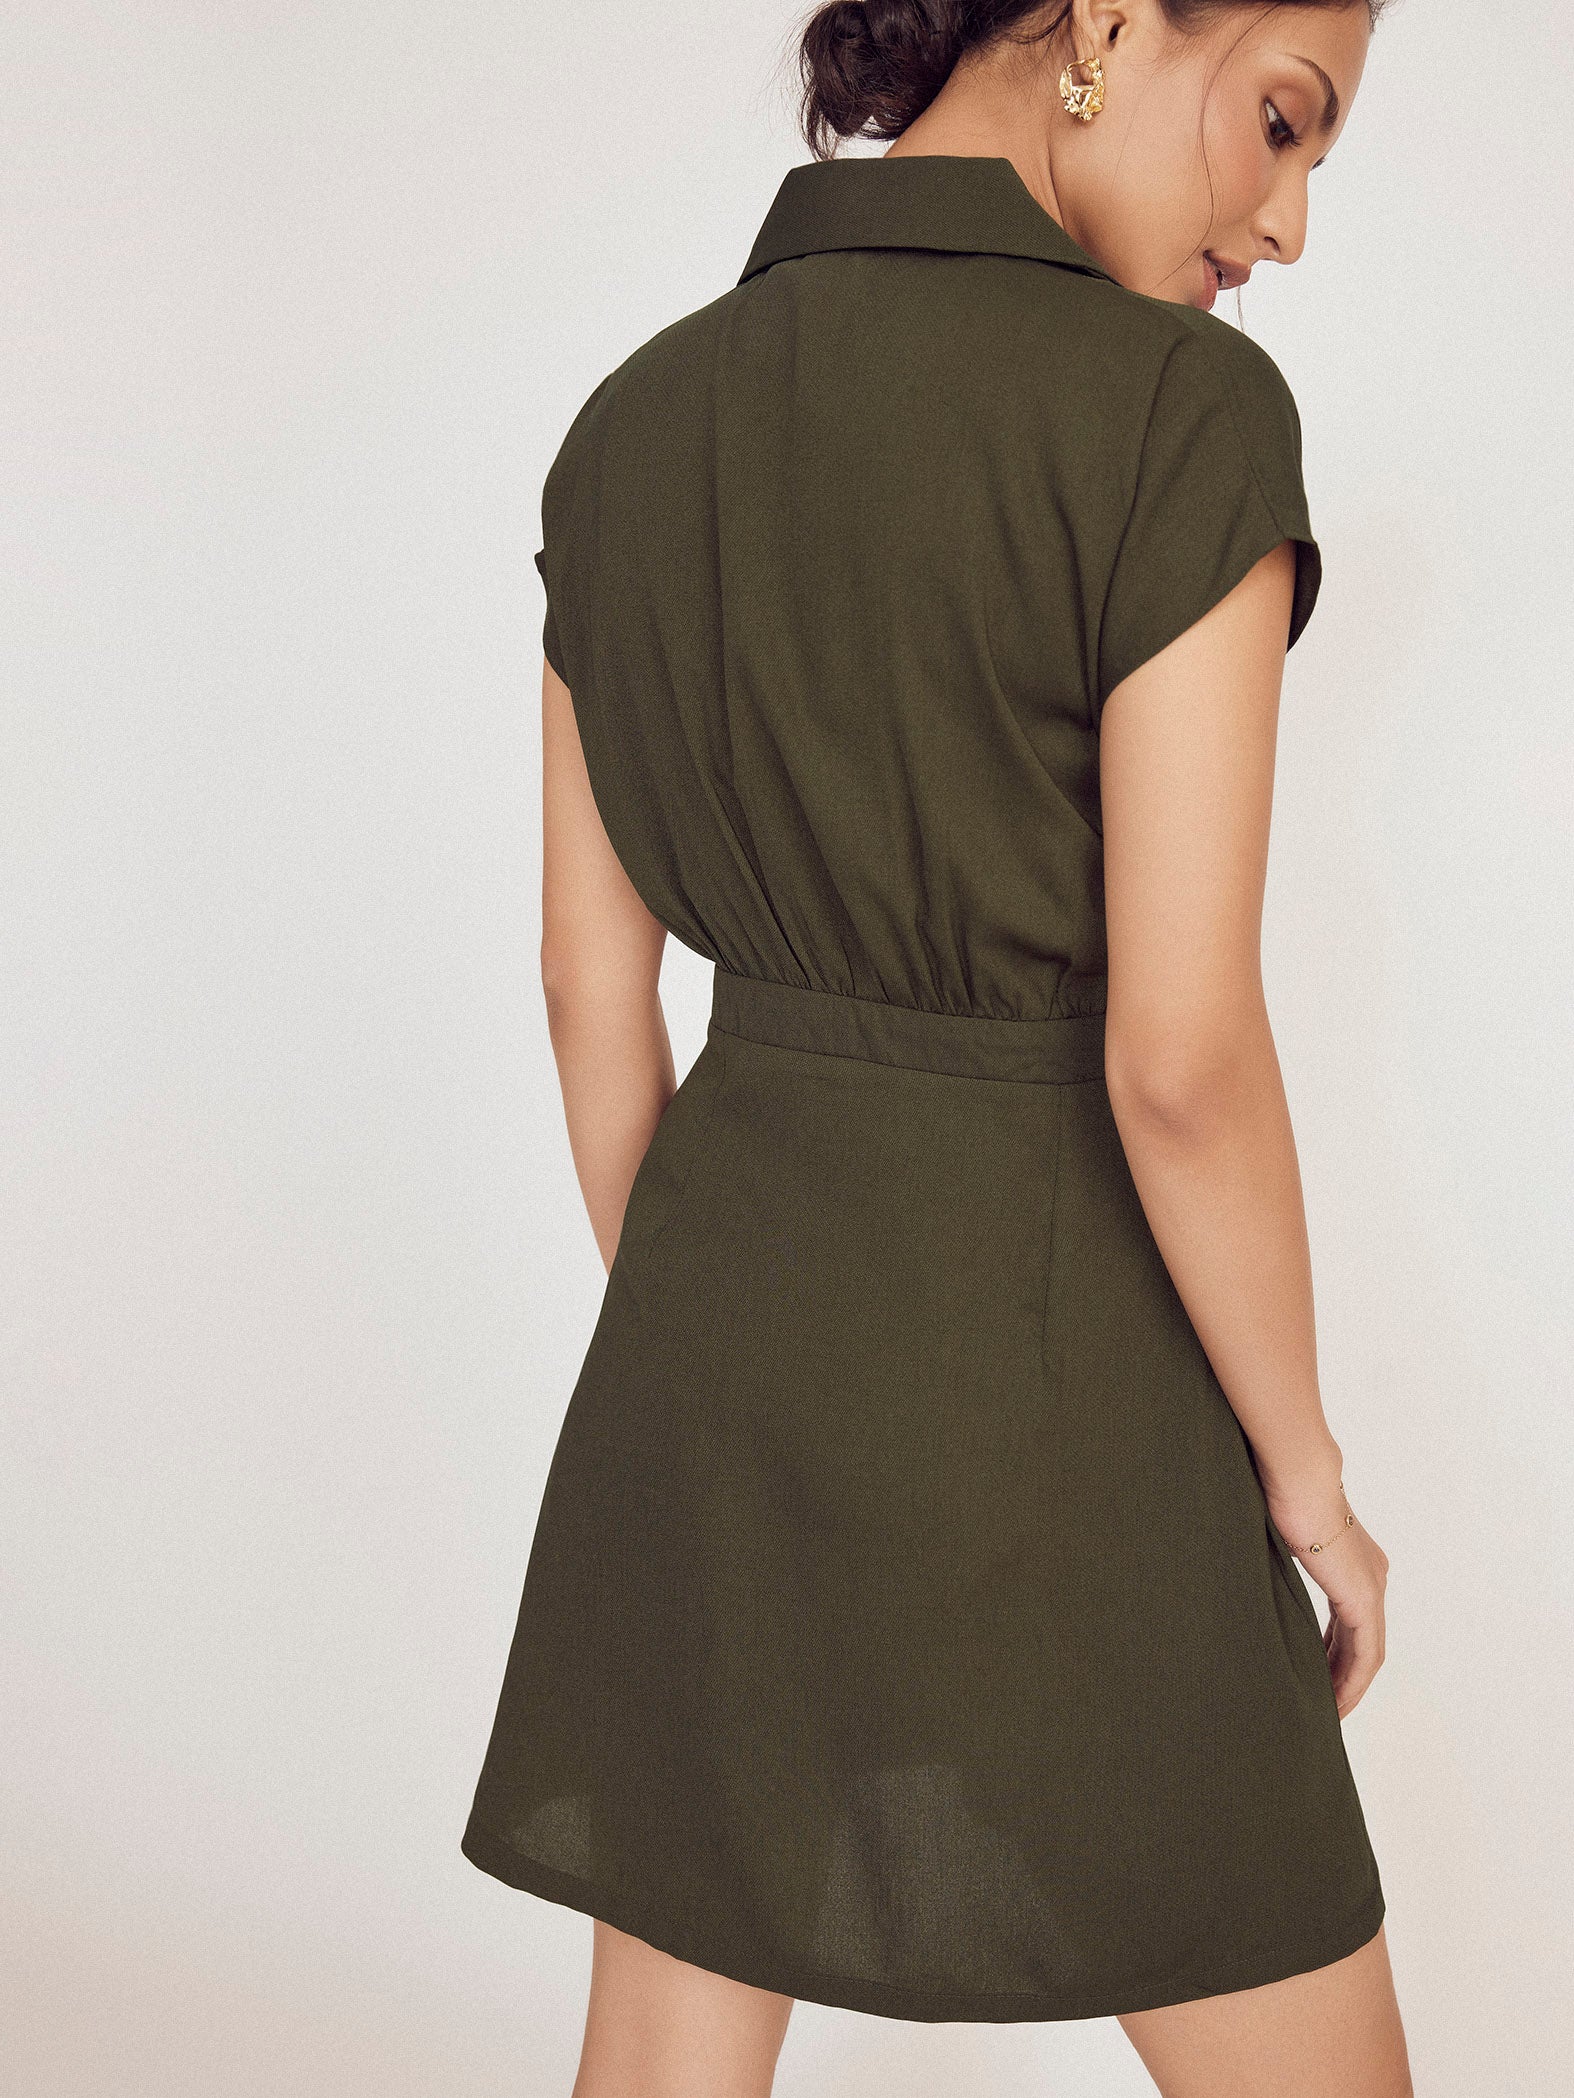 Olive Collared Wrap Dress